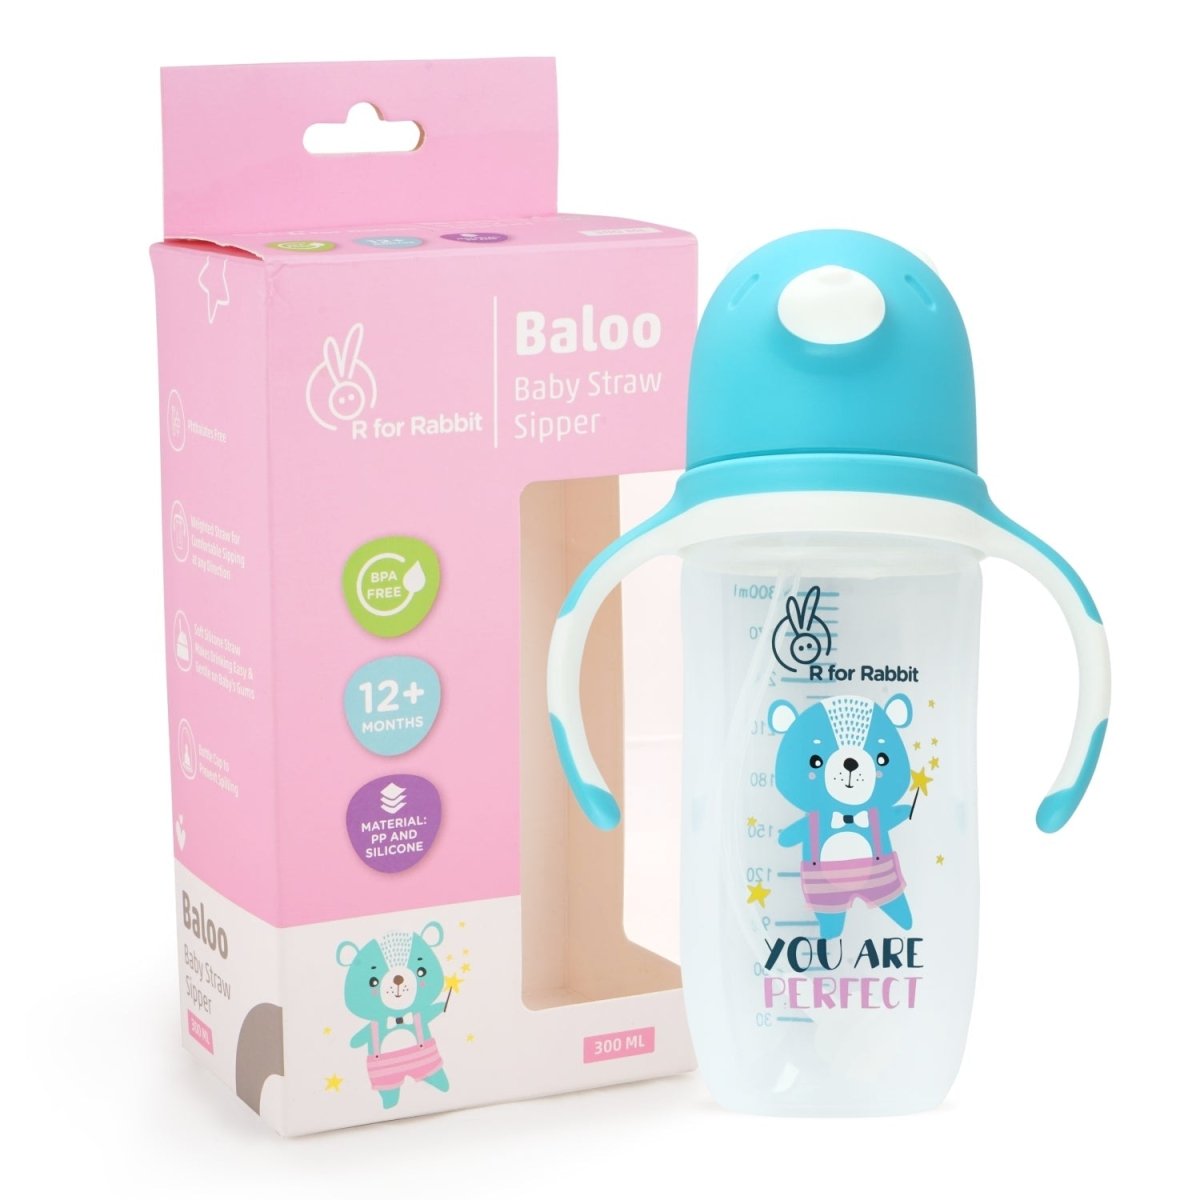 R for Rabbit Baloo Baby Straw Sipper- Blue - SIHPB01